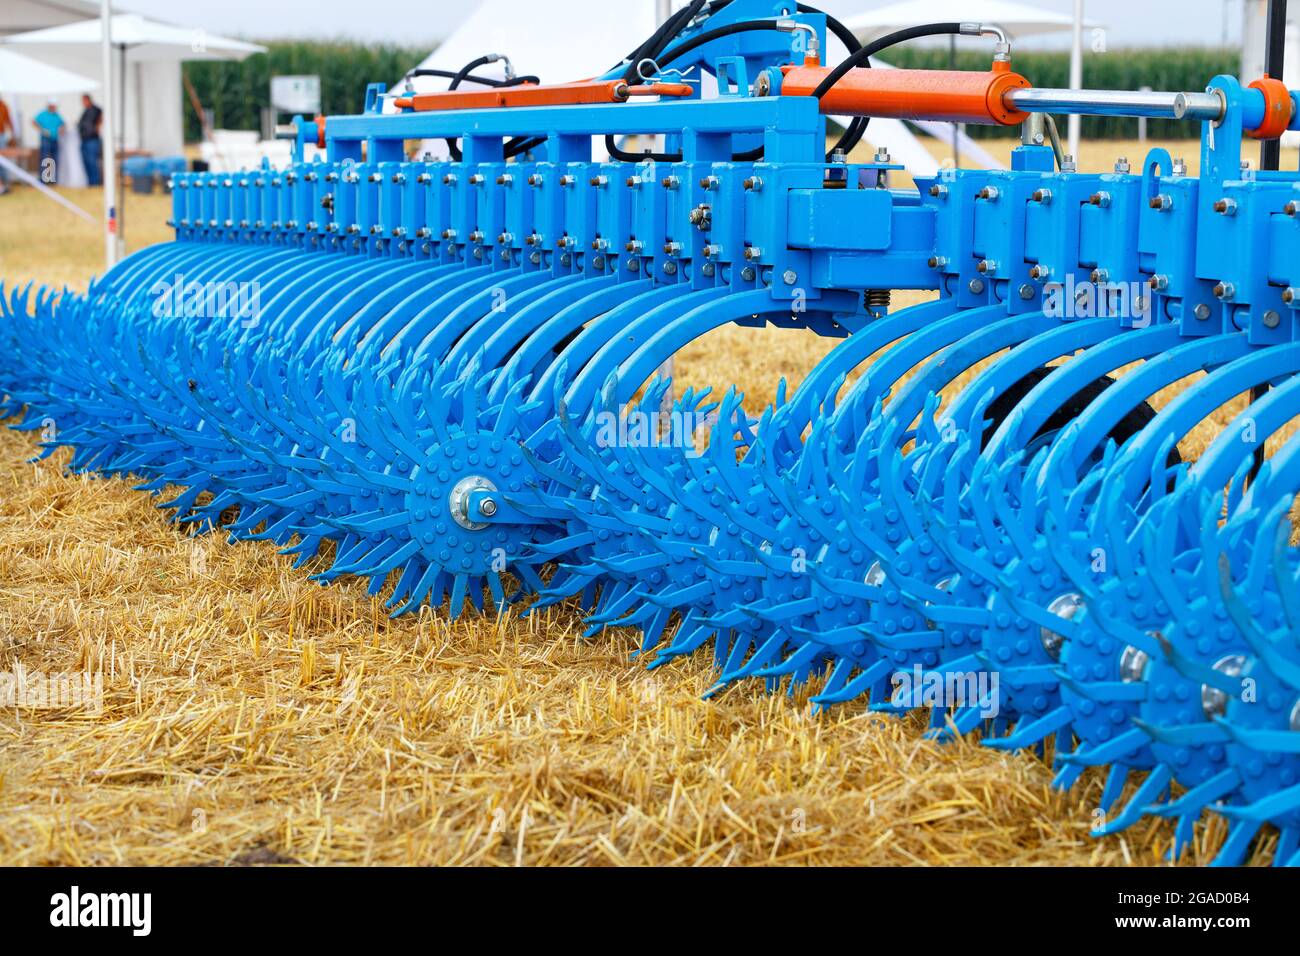 A multi-row toothed metal harrow of blue color for a tractor hitch for  agricultural processing of fields. Selective focus, copy space Stock Photo  - Alamy